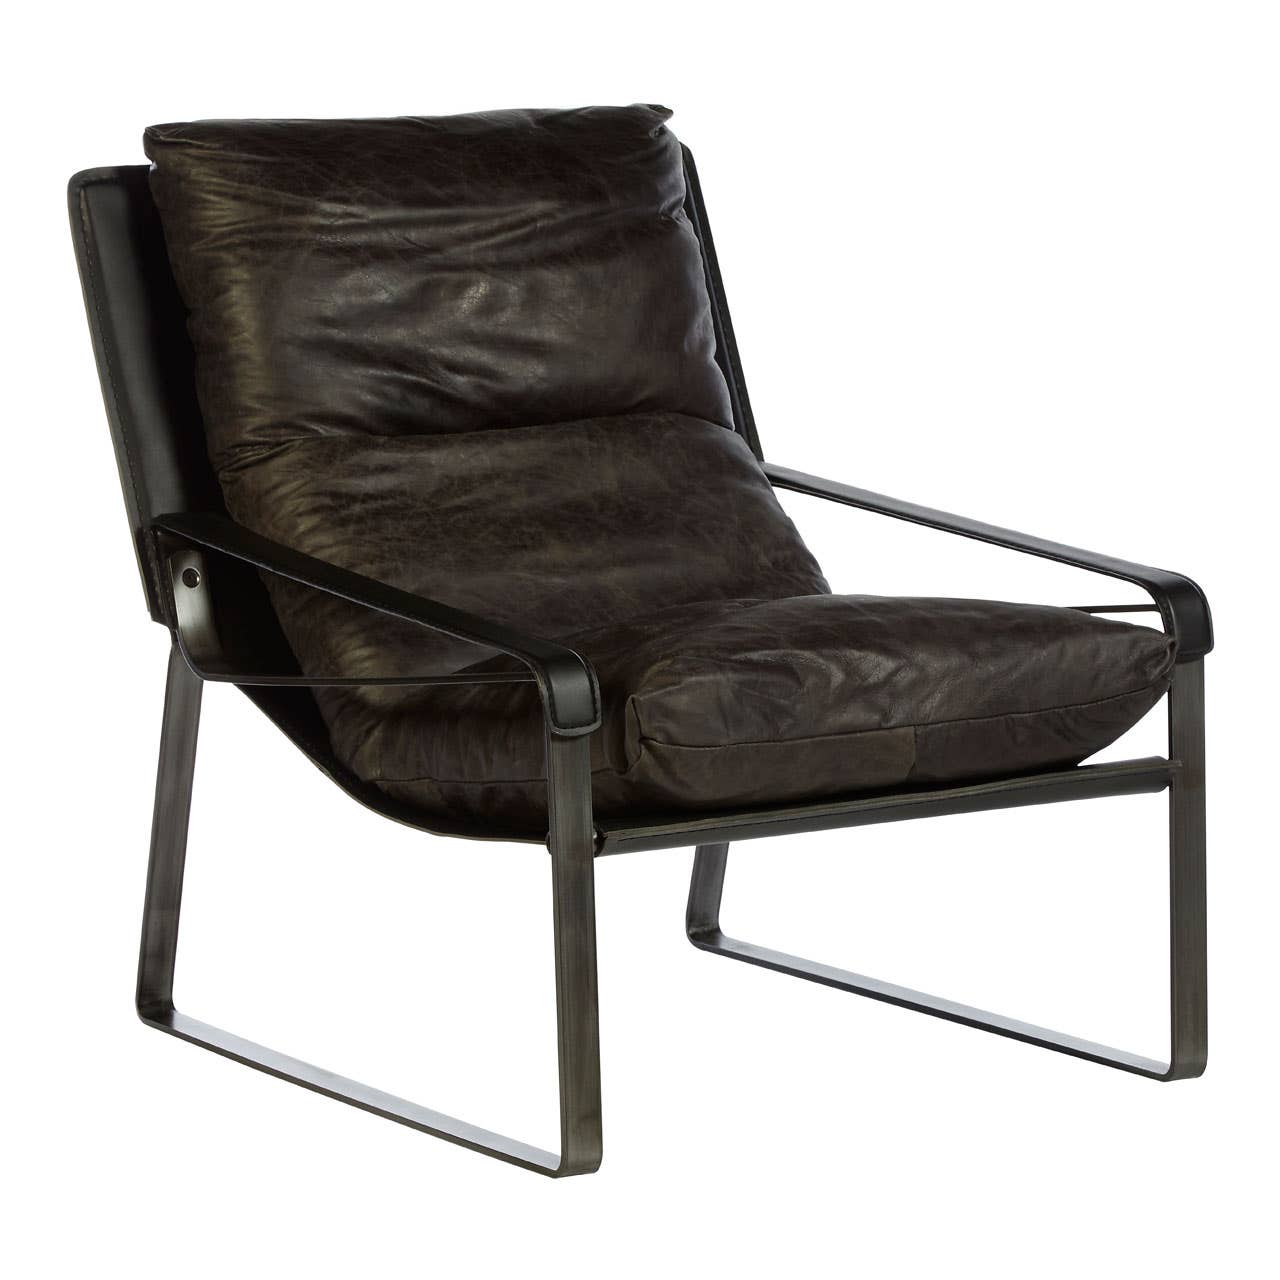 Hoxton Dark Brown Leather Lounge Chair